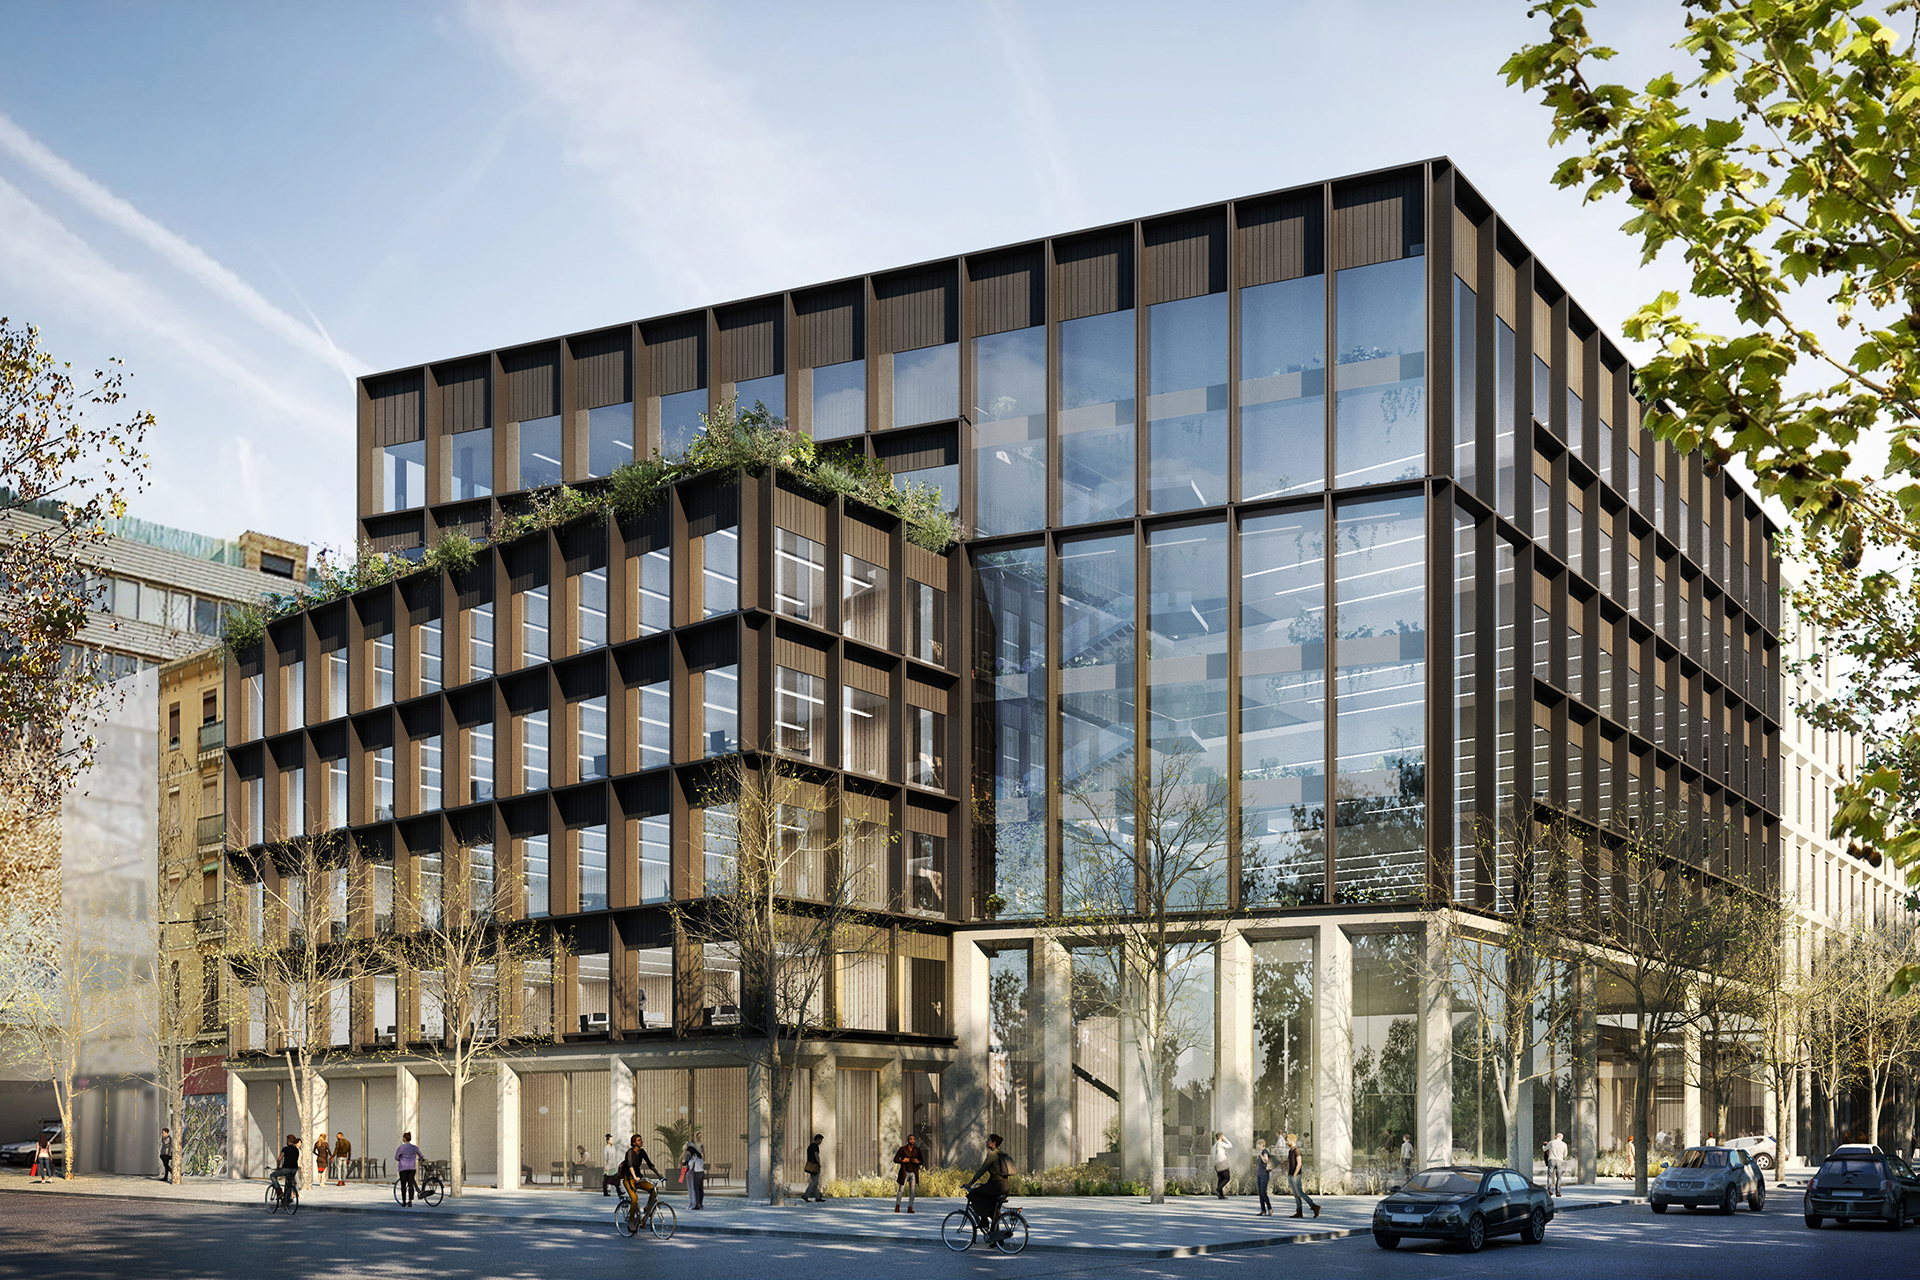 Glenwell Group & Bain Capital to set benchmark in sustainability with Spain’s First Zero-Emission Office Building